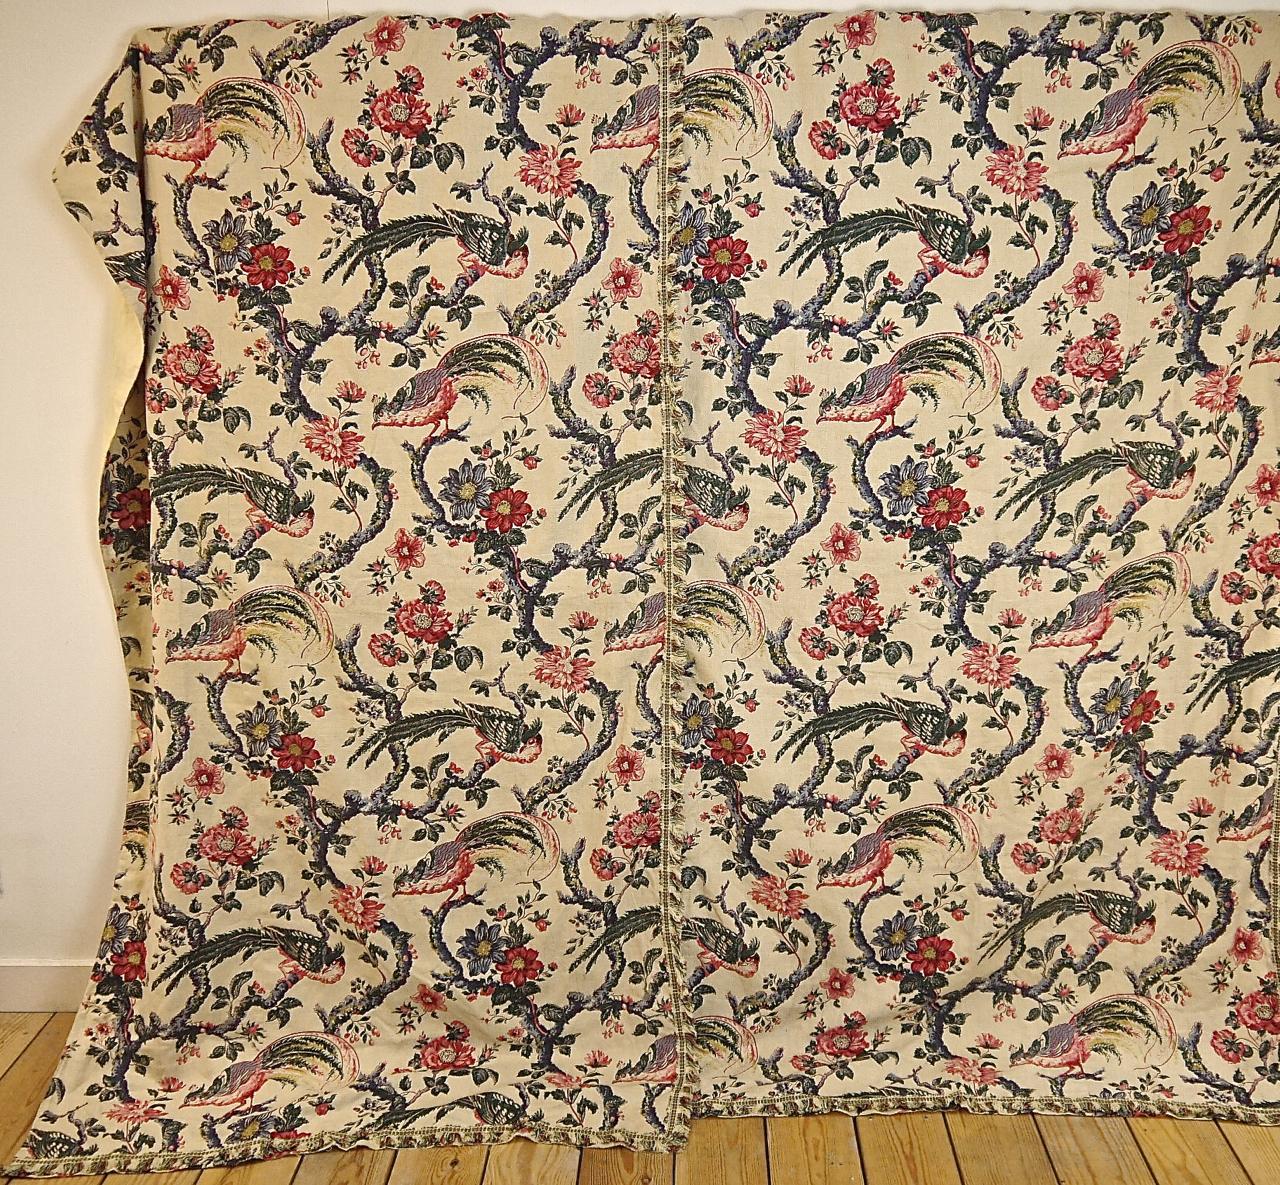 Marvellous set of a French late 19th century large panel and pair of curtains printed on linen with an indienne design of birds and flowers on meandering branches.
Trimmed with cotton fringing and lined in cotton.
Some slight faded sun marks on the